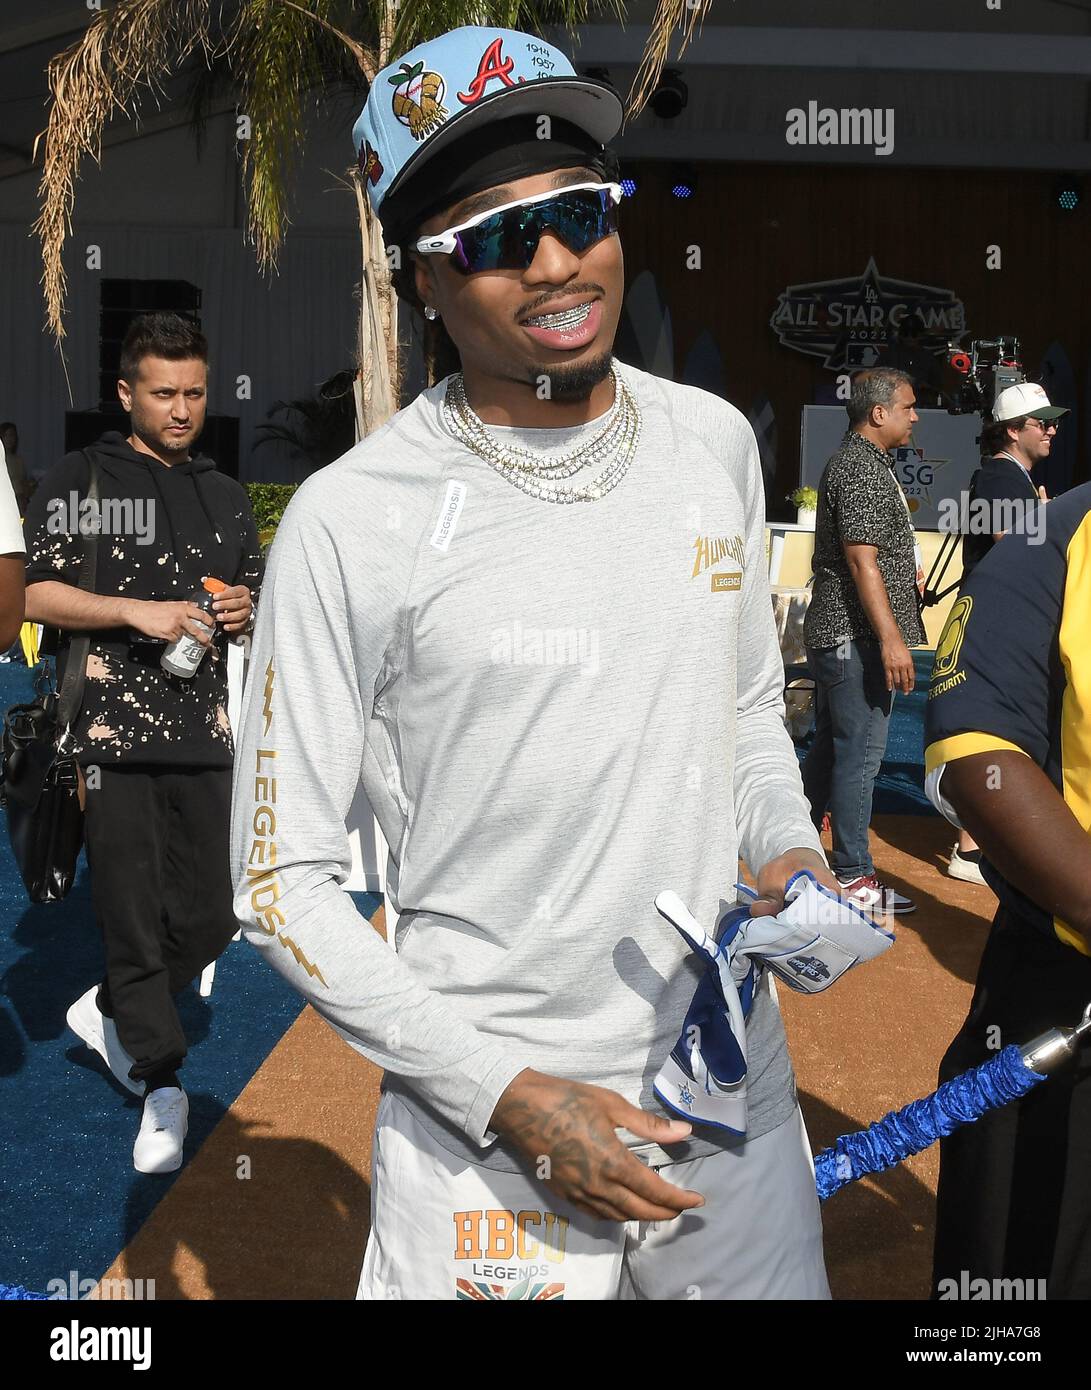 Live updates: Bad Bunny, Quavo compete in MLB All-Star Celebrity